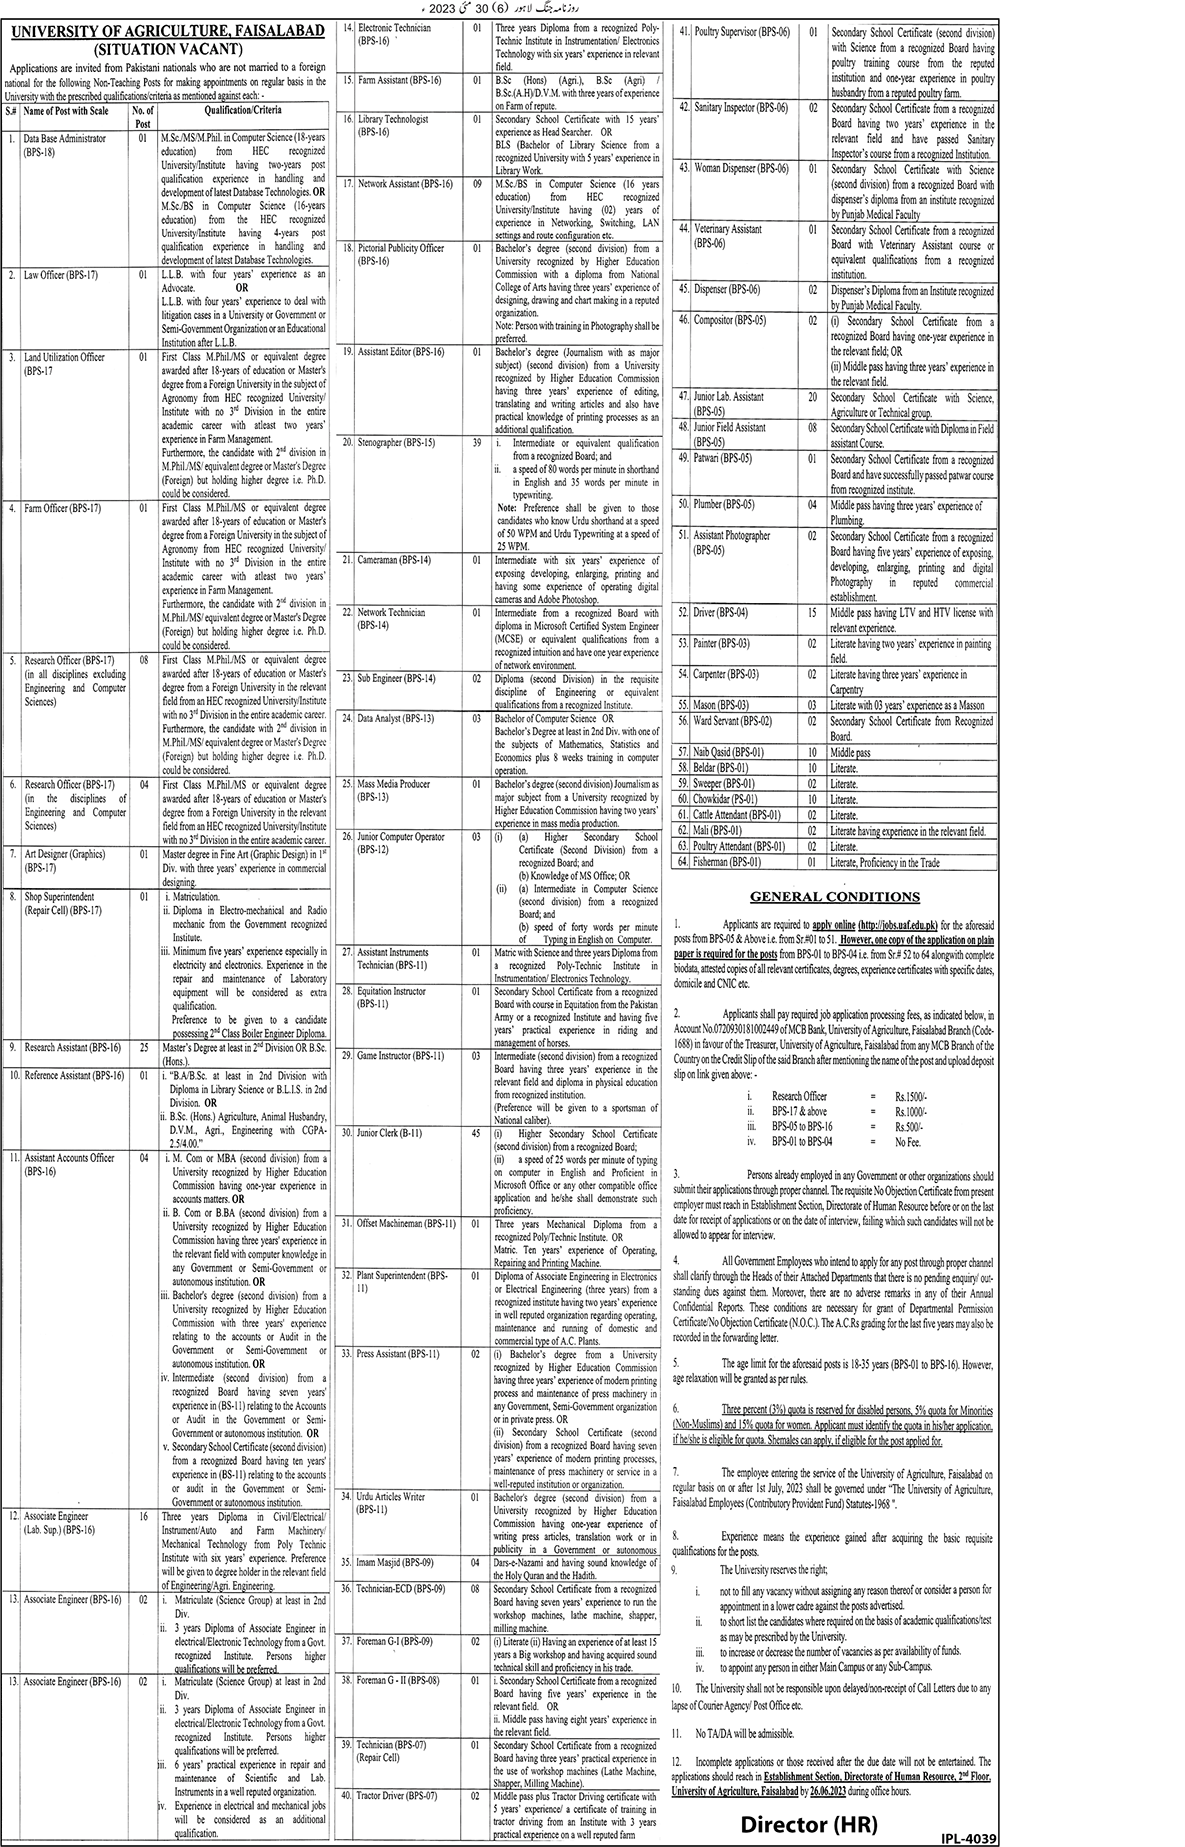 Univeristy of Agriculture Faisailabad New Vacancies June 2023